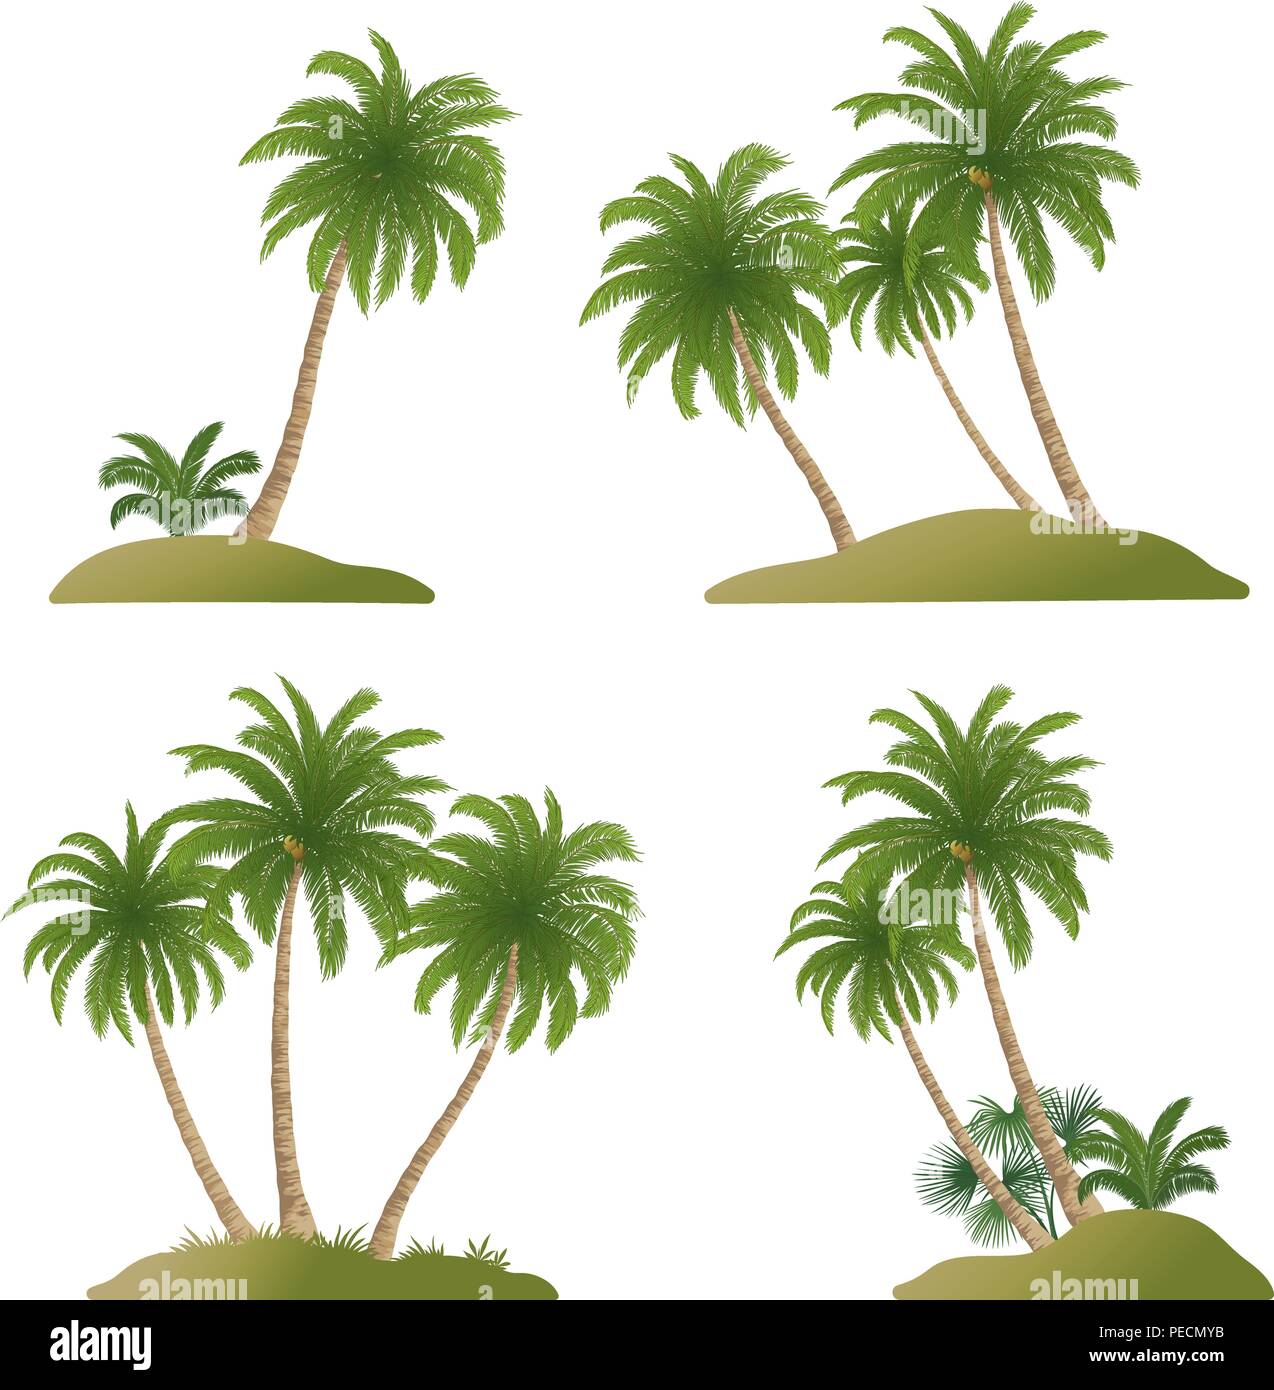 Set Exotic Landscapes, Palm Trees with Green Leaves and Nuts, Tropical Plants and Grass, Isolated On White Background. Vector Stock Vector